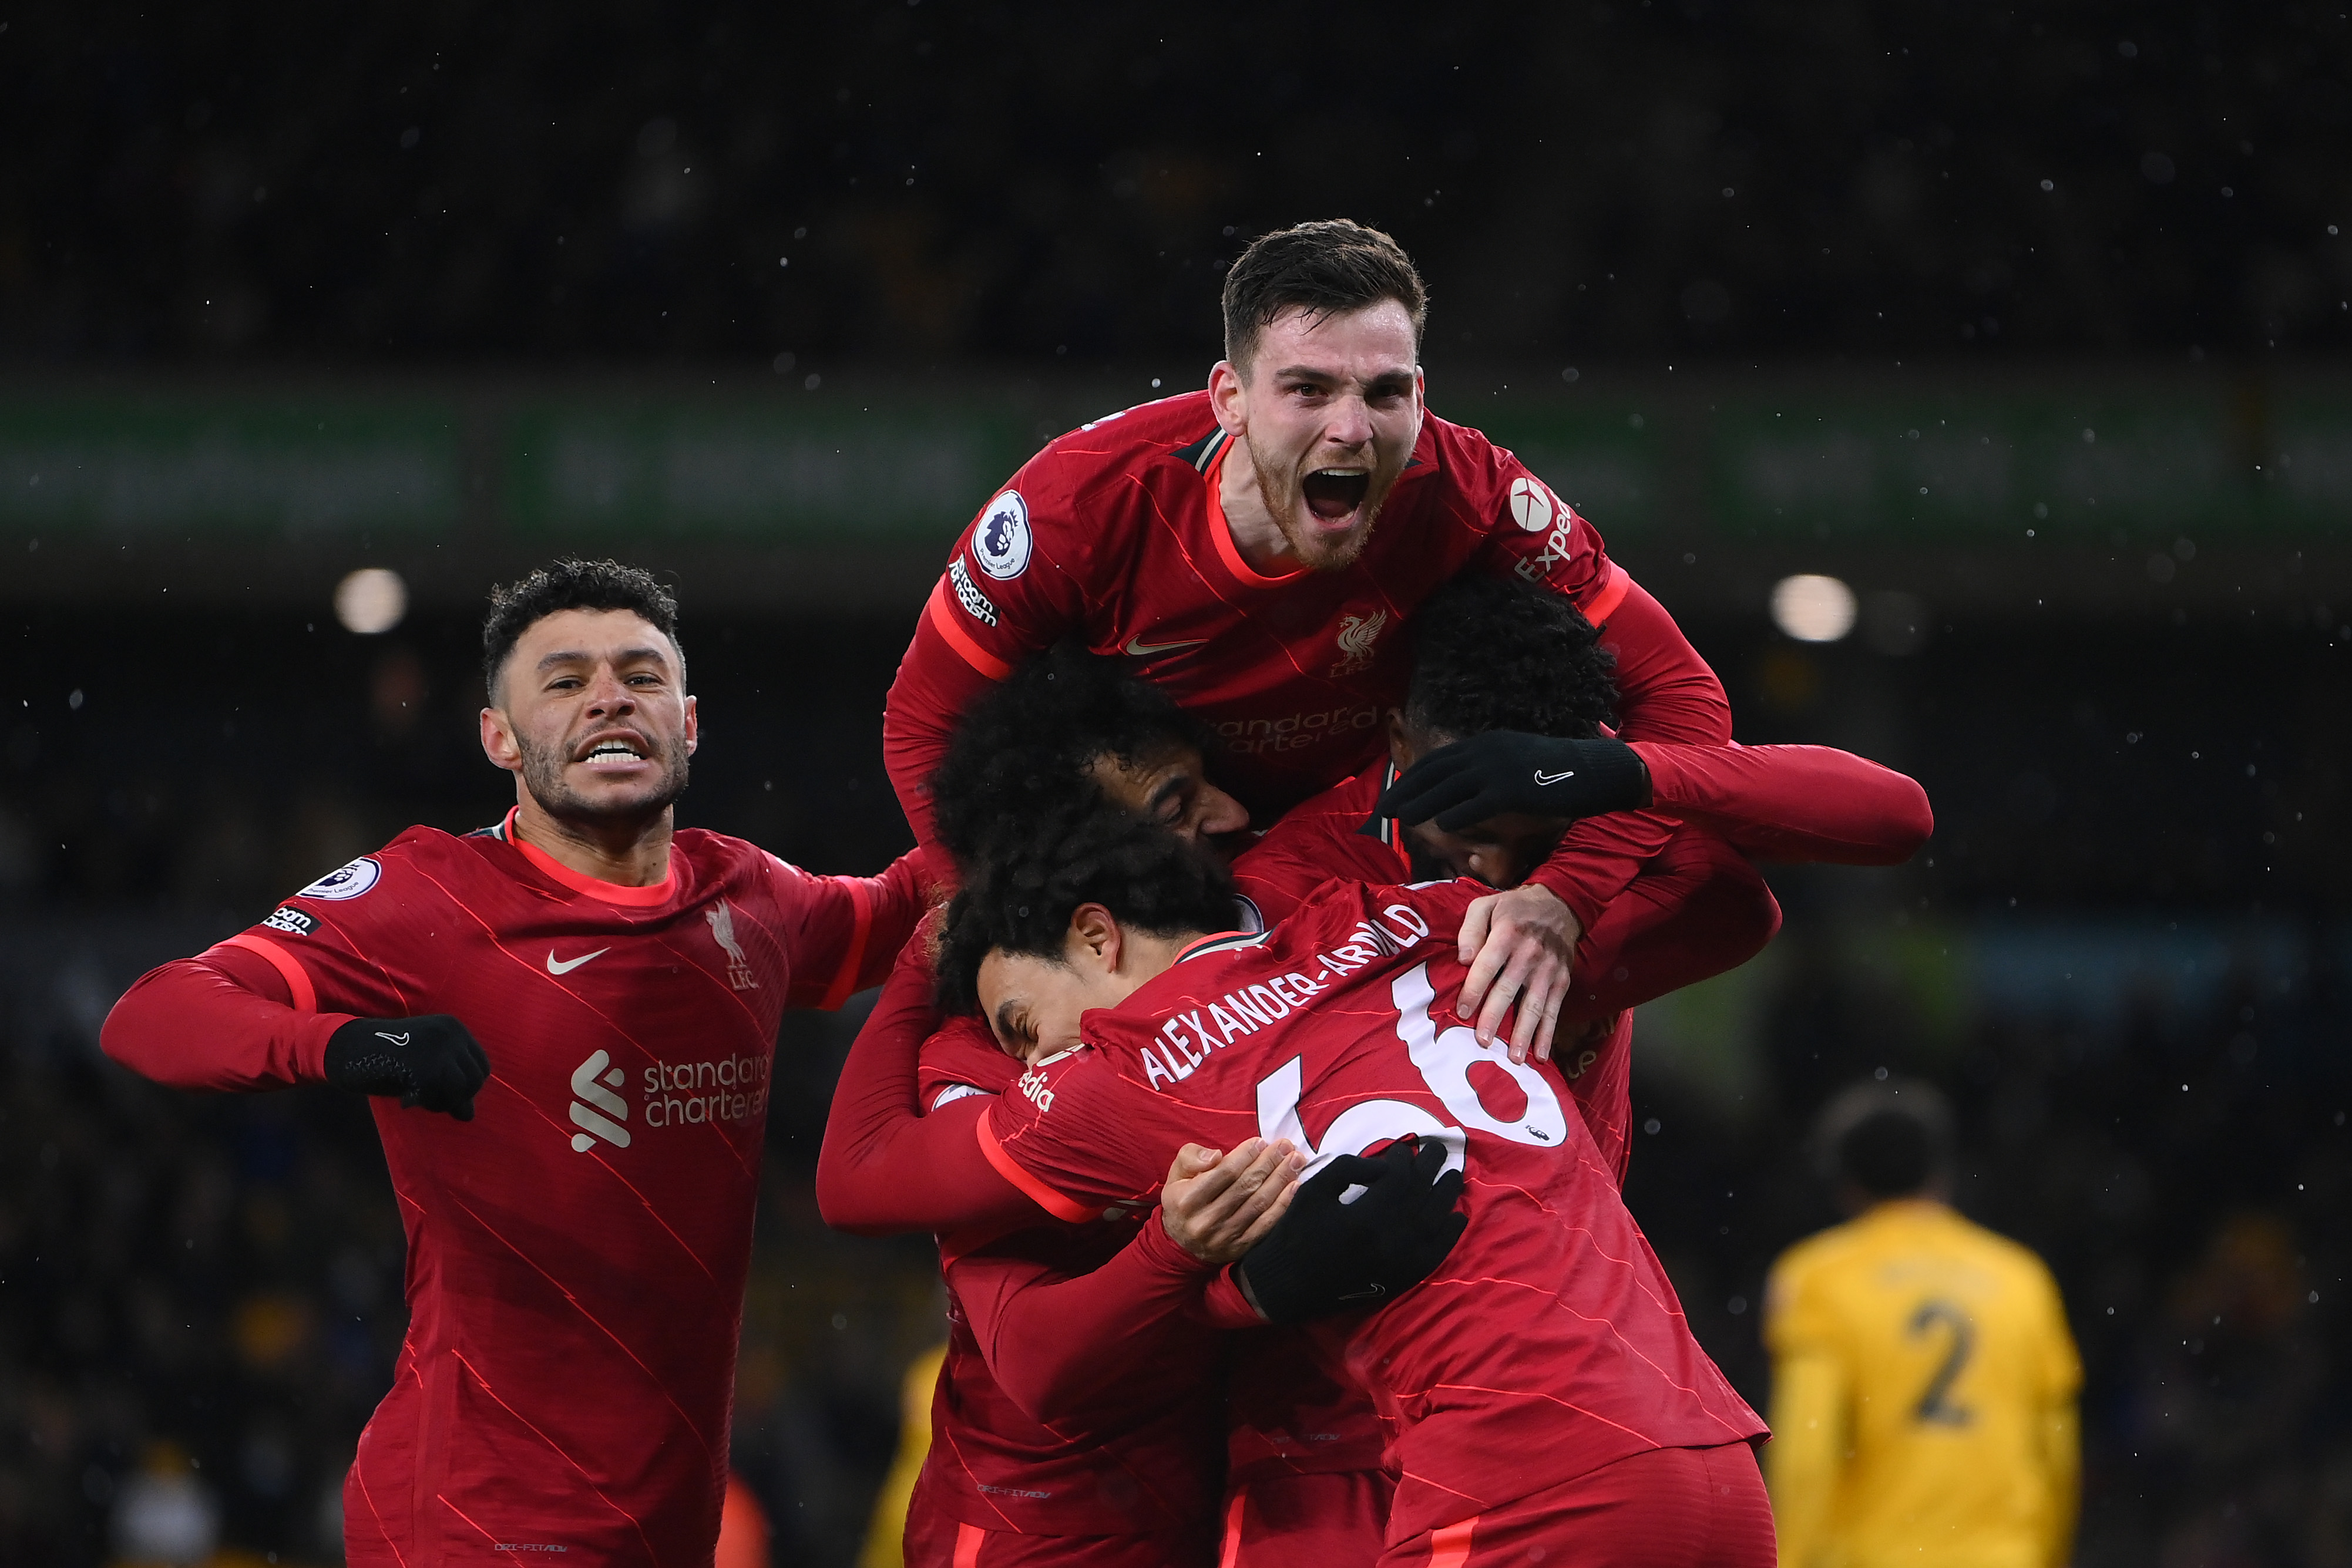 ‘I’d have still laughed in your face’ – Andy Robertson discusses his Liverpool career so far ahead of his third Champions League final appearance on Saturday